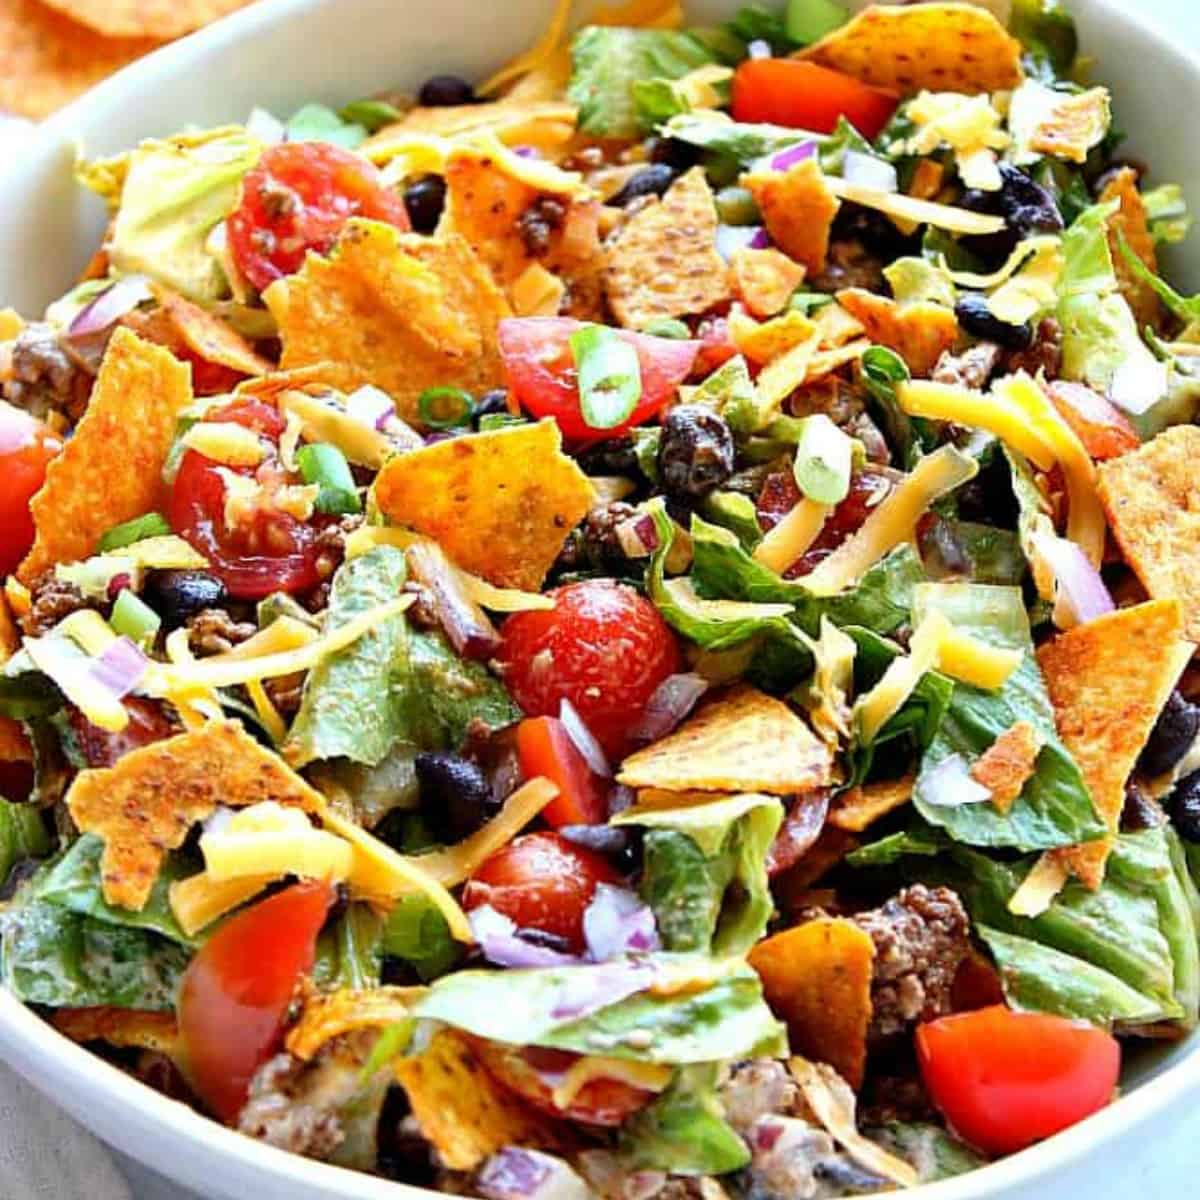 Taco salad with tortilla chips in a bowl.